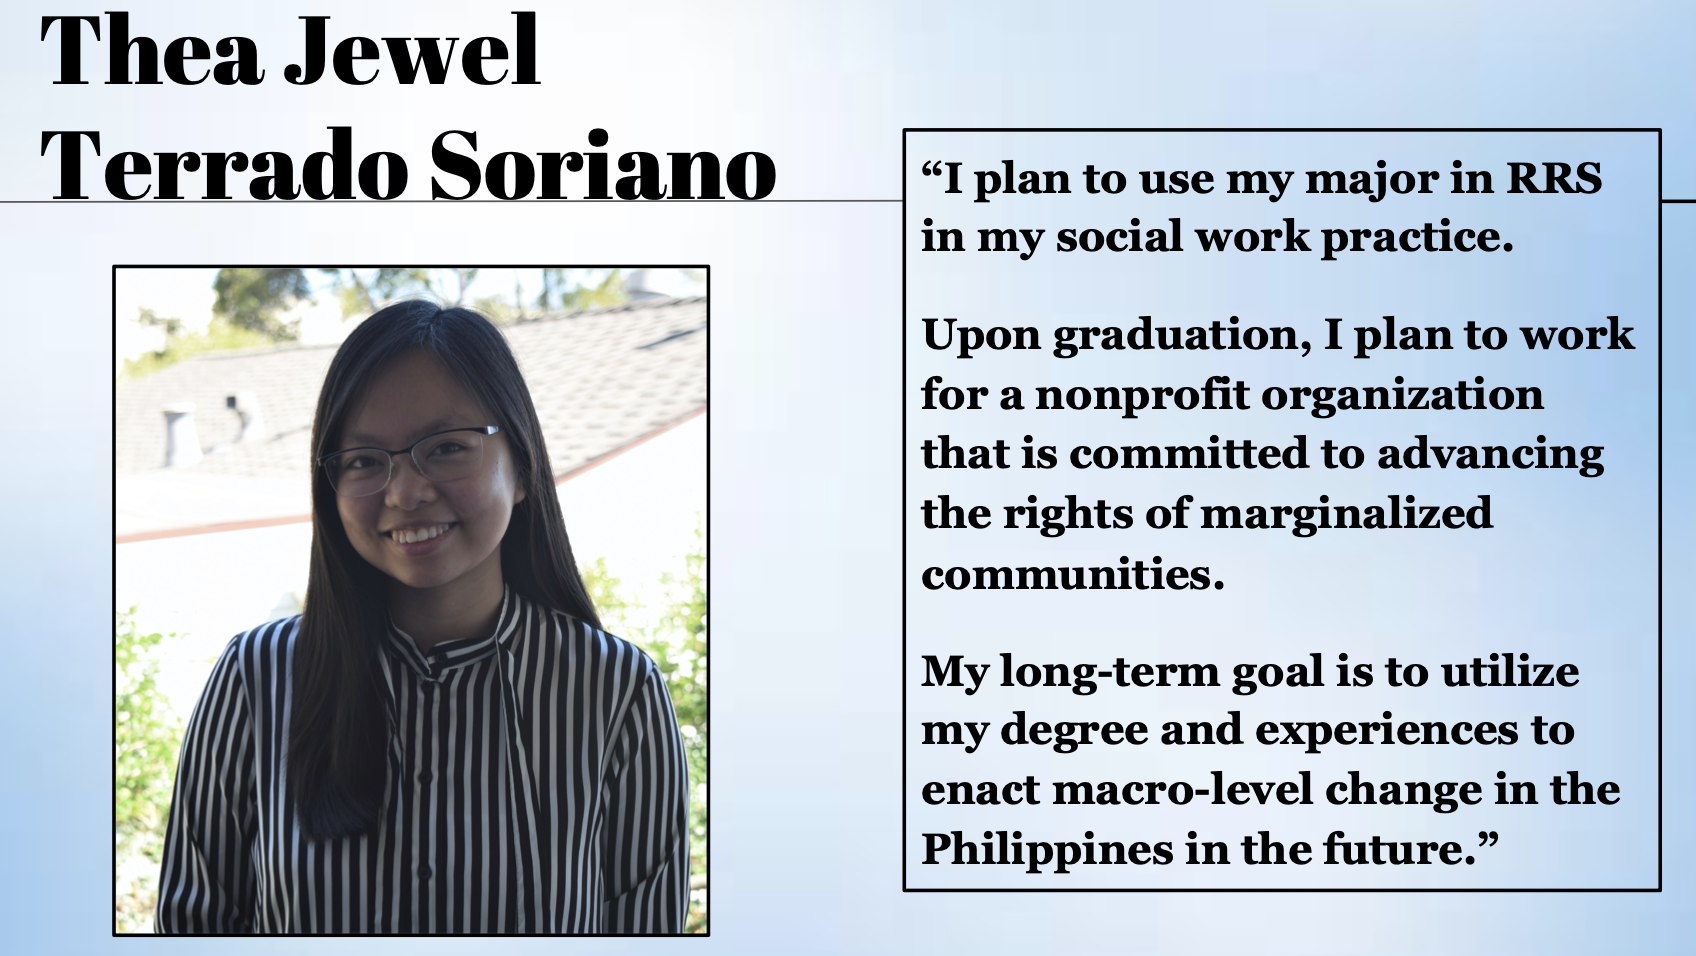 Thea Jewel Terrado Soriano plans to use her major in RRS in my social work practice.